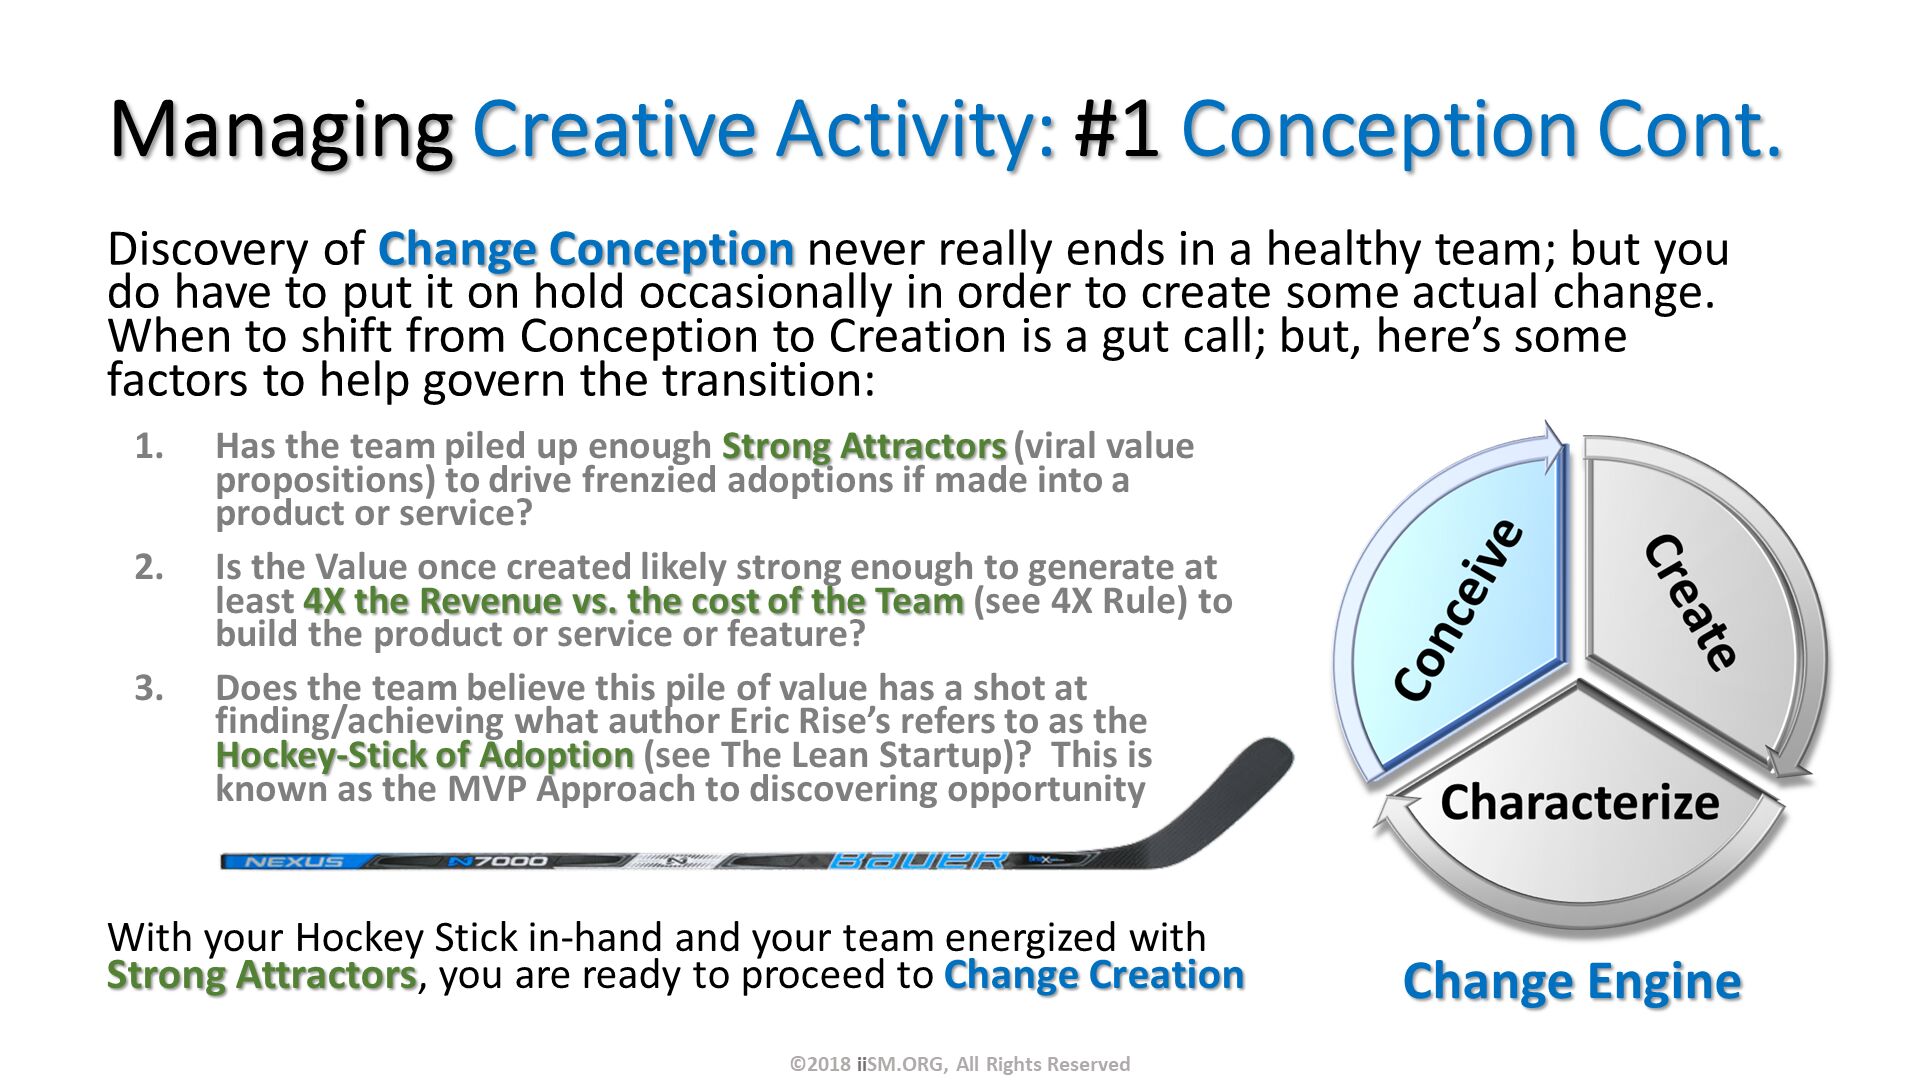 Managing Creative Activity: #1 Conception Cont. Discovery of Change Conception never really ends in a healthy team; but you do have to put it on hold occasionally in order to create some actual change.  When to shift from Conception to Creation is a gut call; but, here’s some factors to help govern the transition:. With your Hockey Stick in-hand and your team energized with Strong Attractors, you are ready to proceed to Change Creation. Has the team piled up enough Strong Attractors (viral value propositions) to drive frenzied adoptions if made into a product or service?
Is the Value once created likely strong enough to generate at least 4X the Revenue vs. the cost of the Team (see 4X Rule) to build the product or service or feature?
Does the team believe this pile of value has a shot at finding/achieving what author Eric Rise’s refers to as the Hockey-Stick of Adoption (see The Lean Startup)?  This is known as the MVP Approach to discovering opportunity. ©2018 iiSM.ORG, All Rights Reserved. 